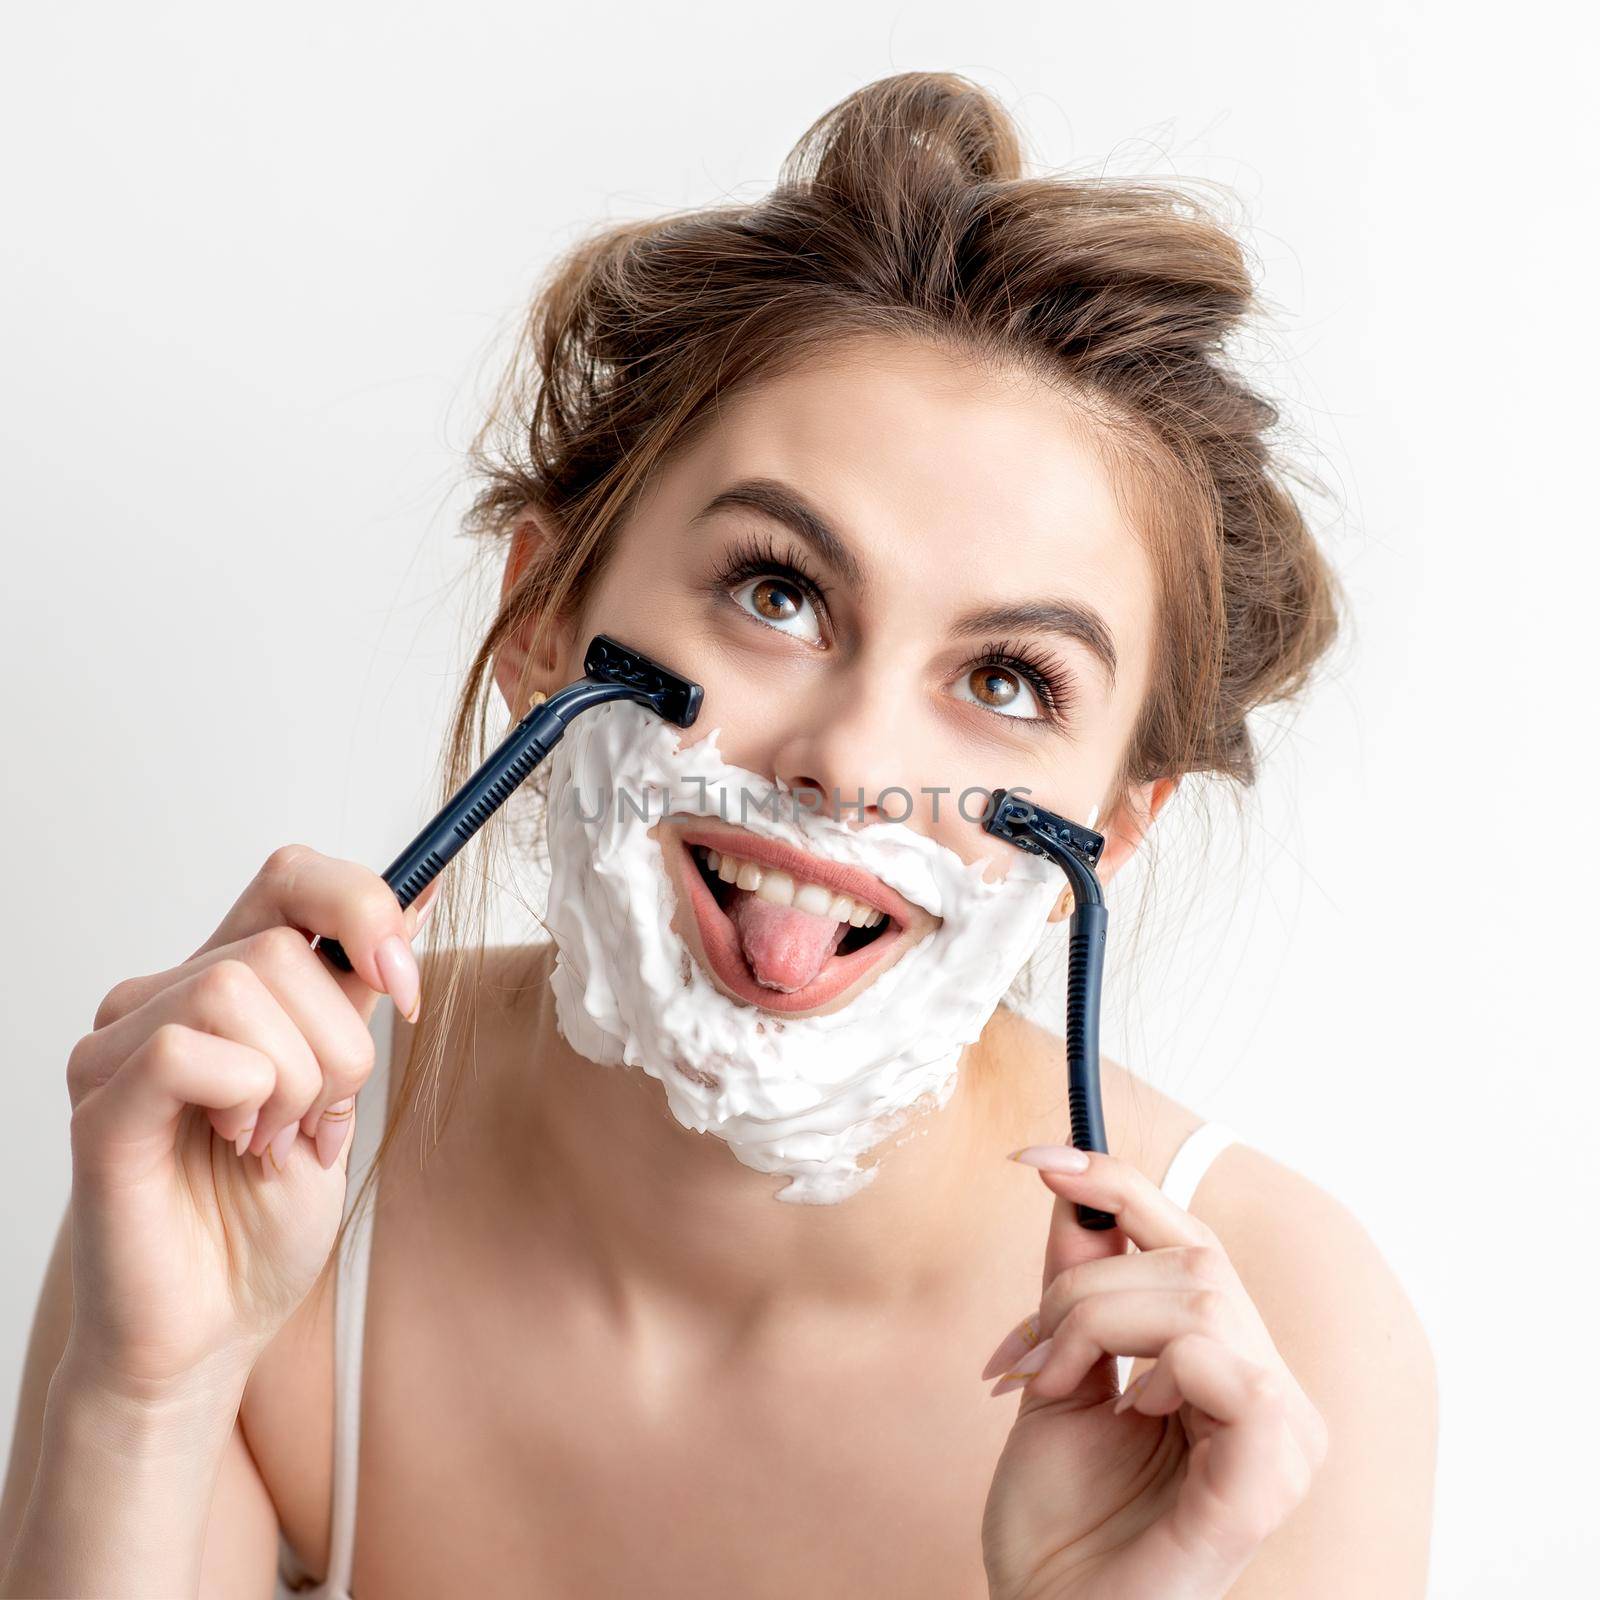 Beautiful young caucasian woman shaving her face by two razors with tongue out on white background.